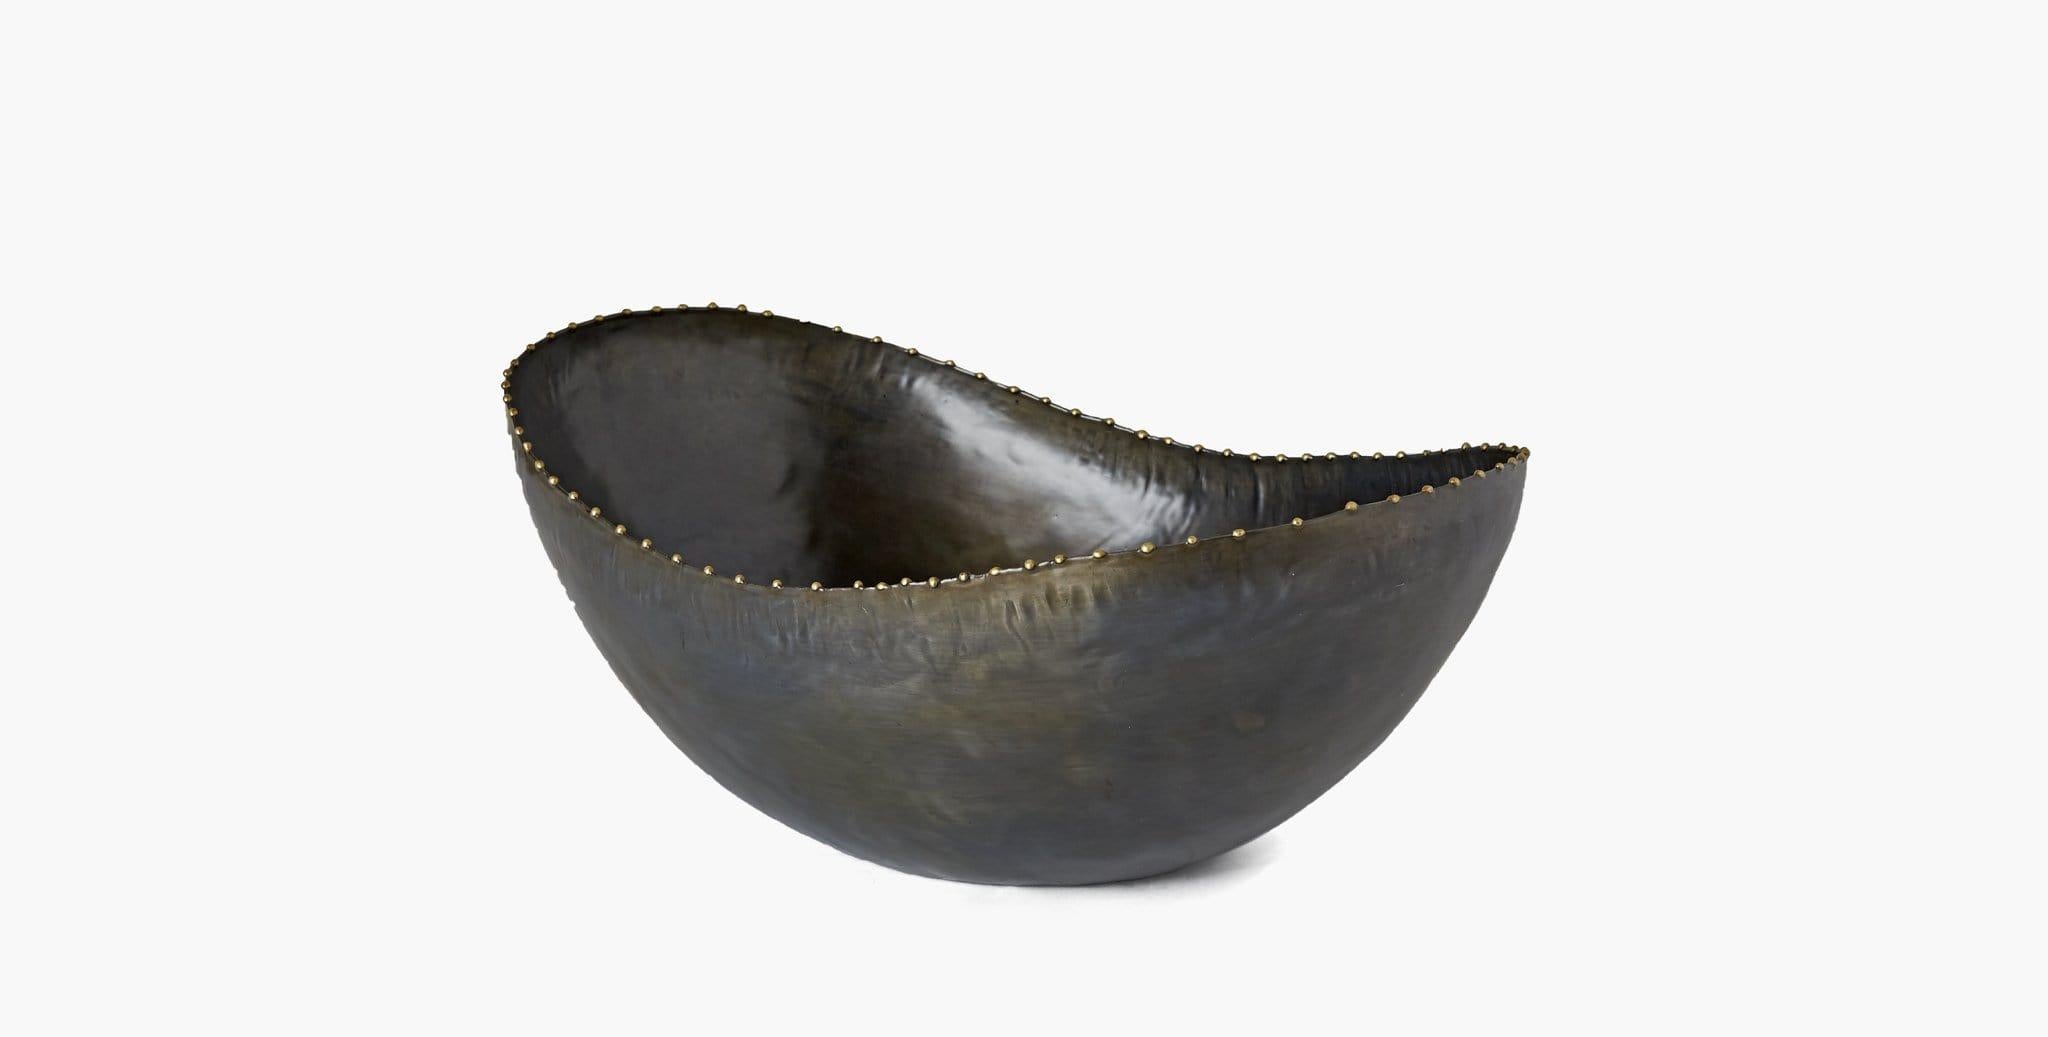 Our Montana Bowls effortlessly elevate your home décor, featuring organic curves in ebonized iron with subtle metal detailing to highlight its serpentine edge. Our handcrafted finishes are inspired by variations within natural textures. Each